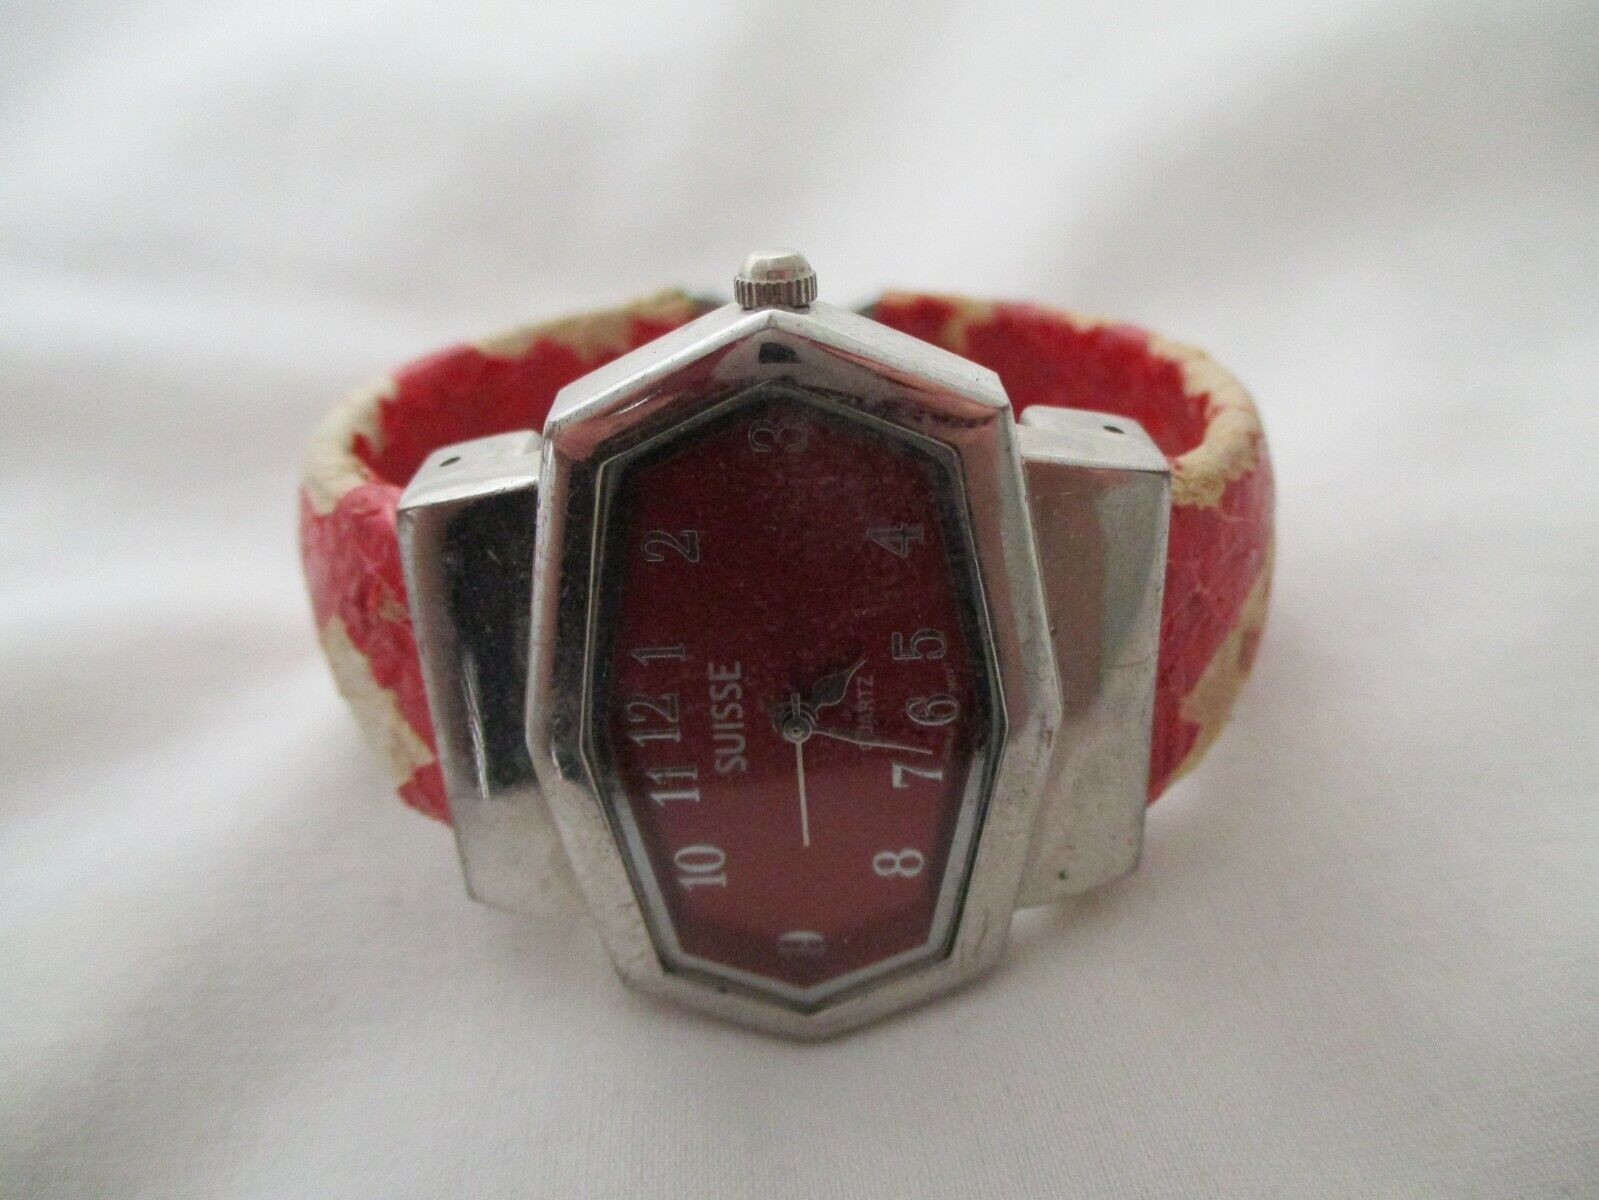 Suisse Analog Wristwatch with a Cuff Band and Quartz Movement